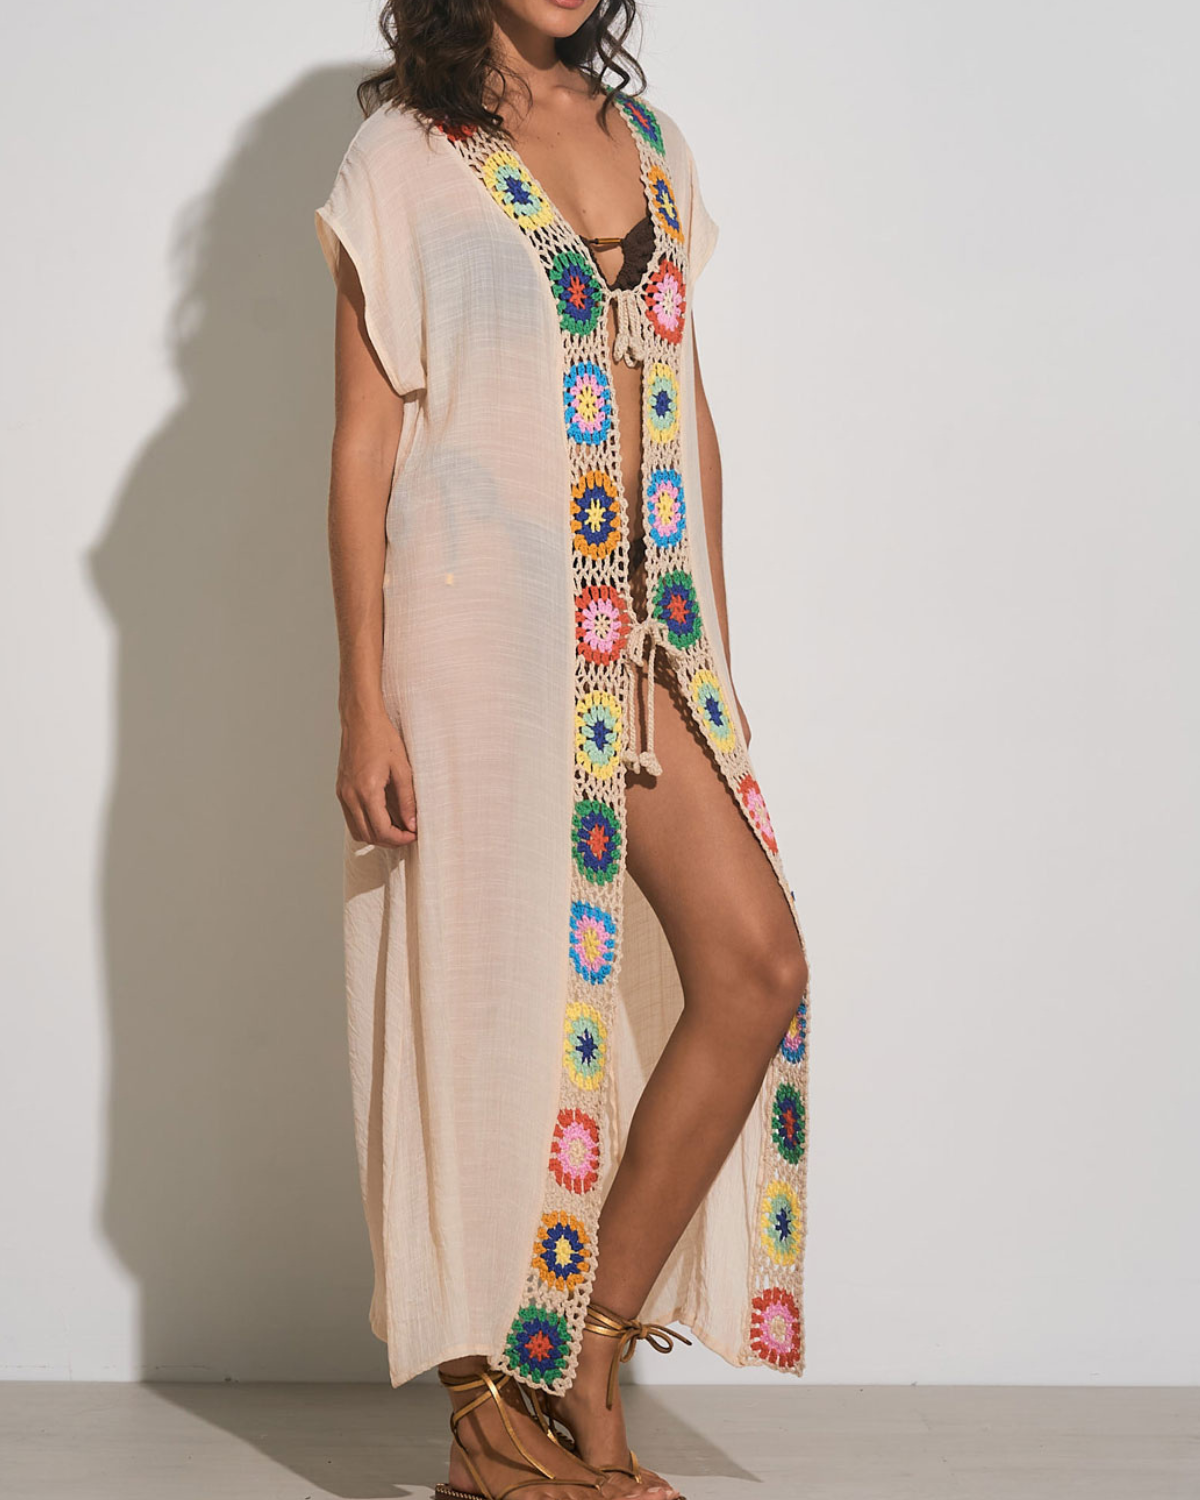 Model wearing a maxi length short sleeve kimono cover up with square crochet detail in beige, green, yellow, blue, and orange